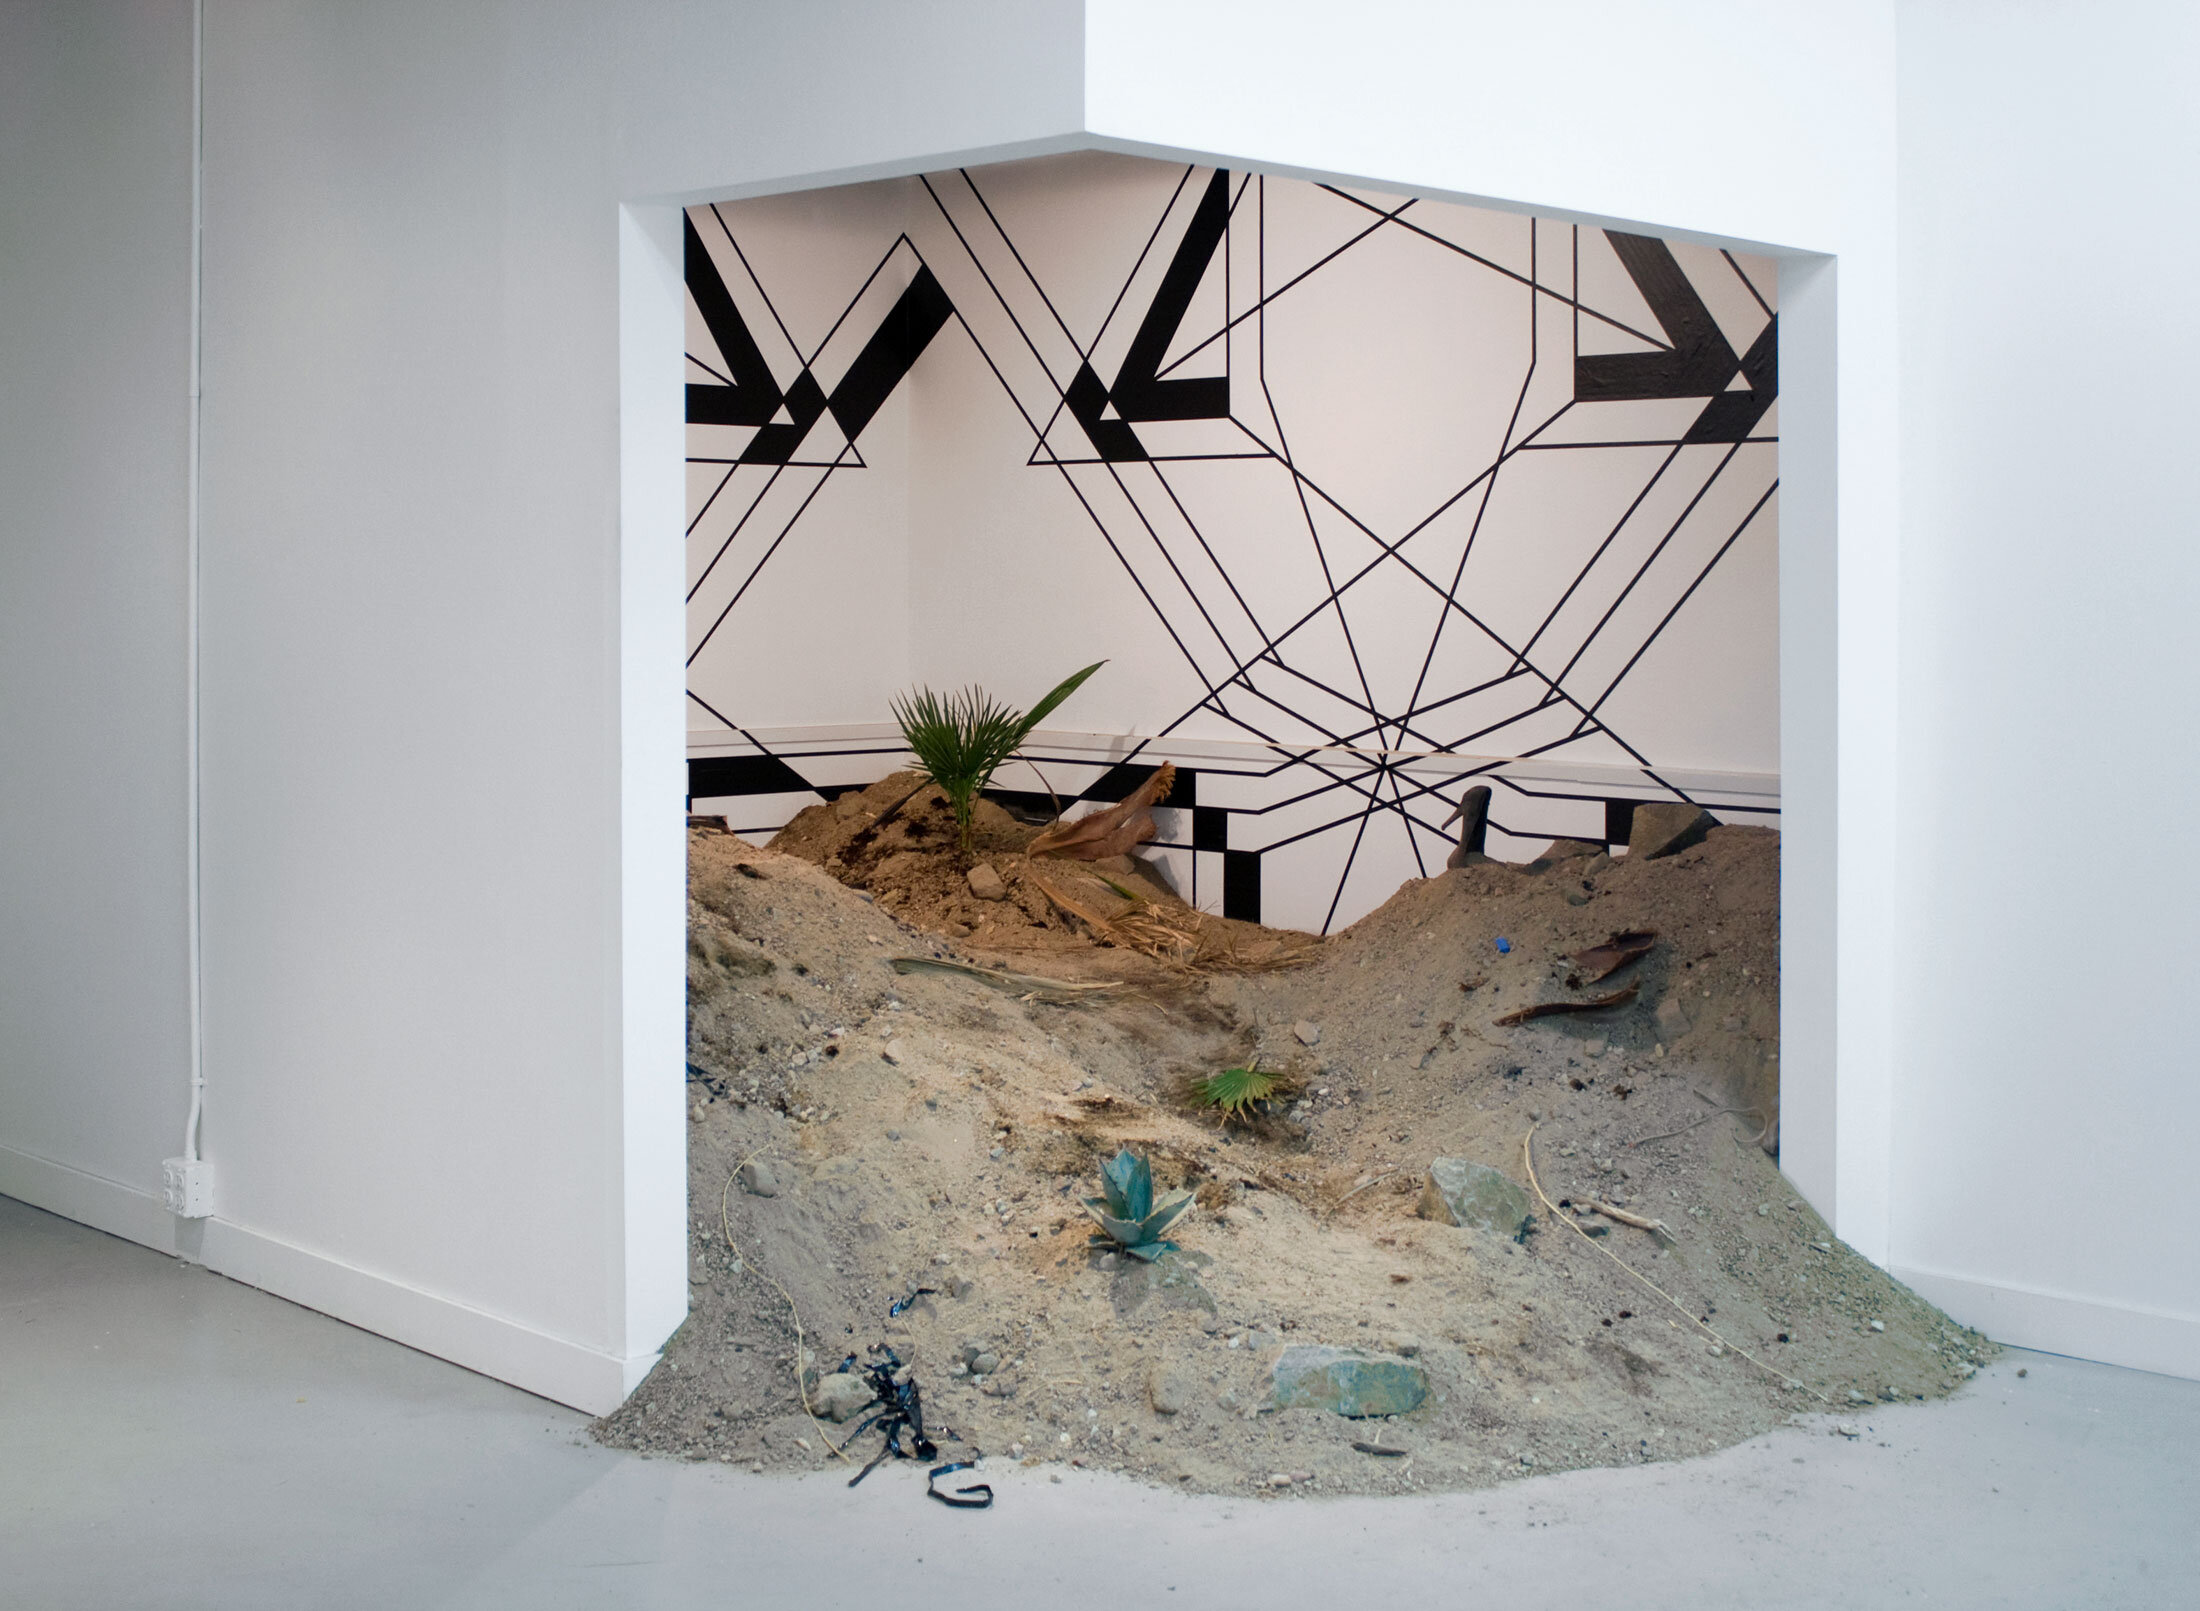    Study for an Oasis: Indio    Soil, rocks, live plants, local detritus, tape on wall 